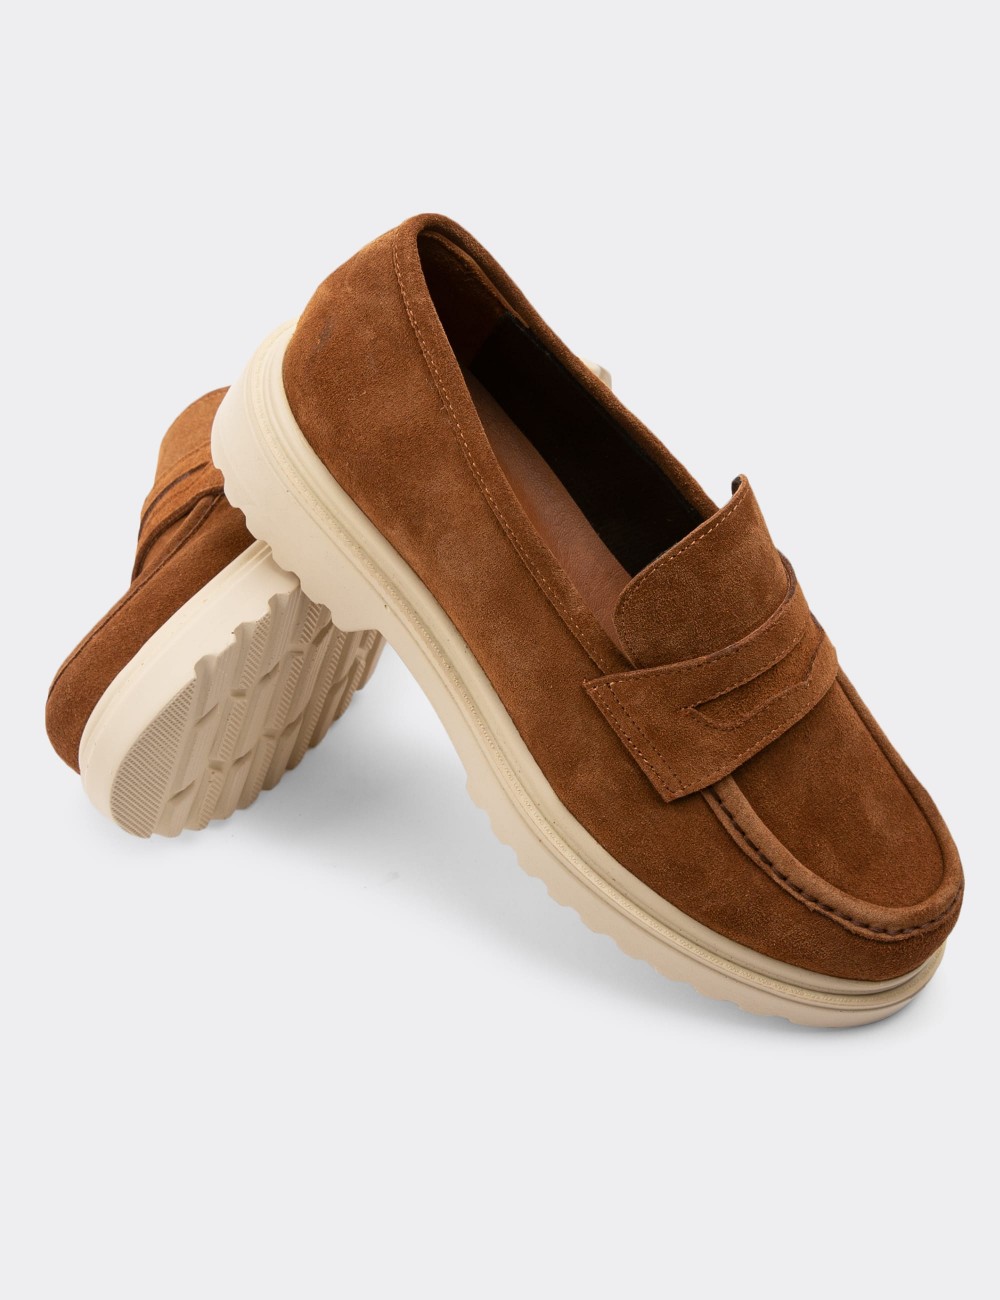 Tan Suede Leather Loafers - 01903ZTBAP01